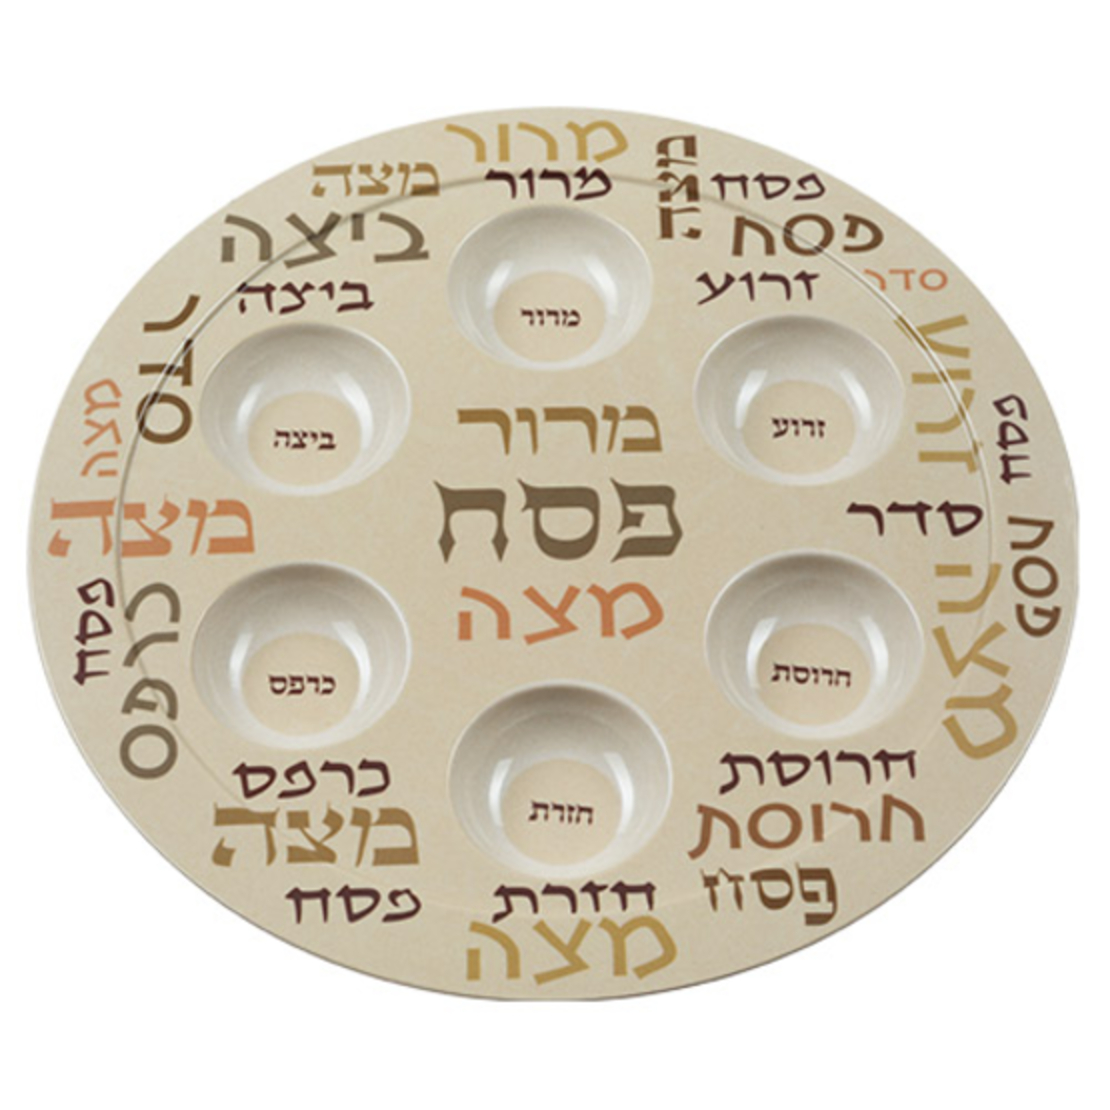 Melamine Passover plate in brown colors 